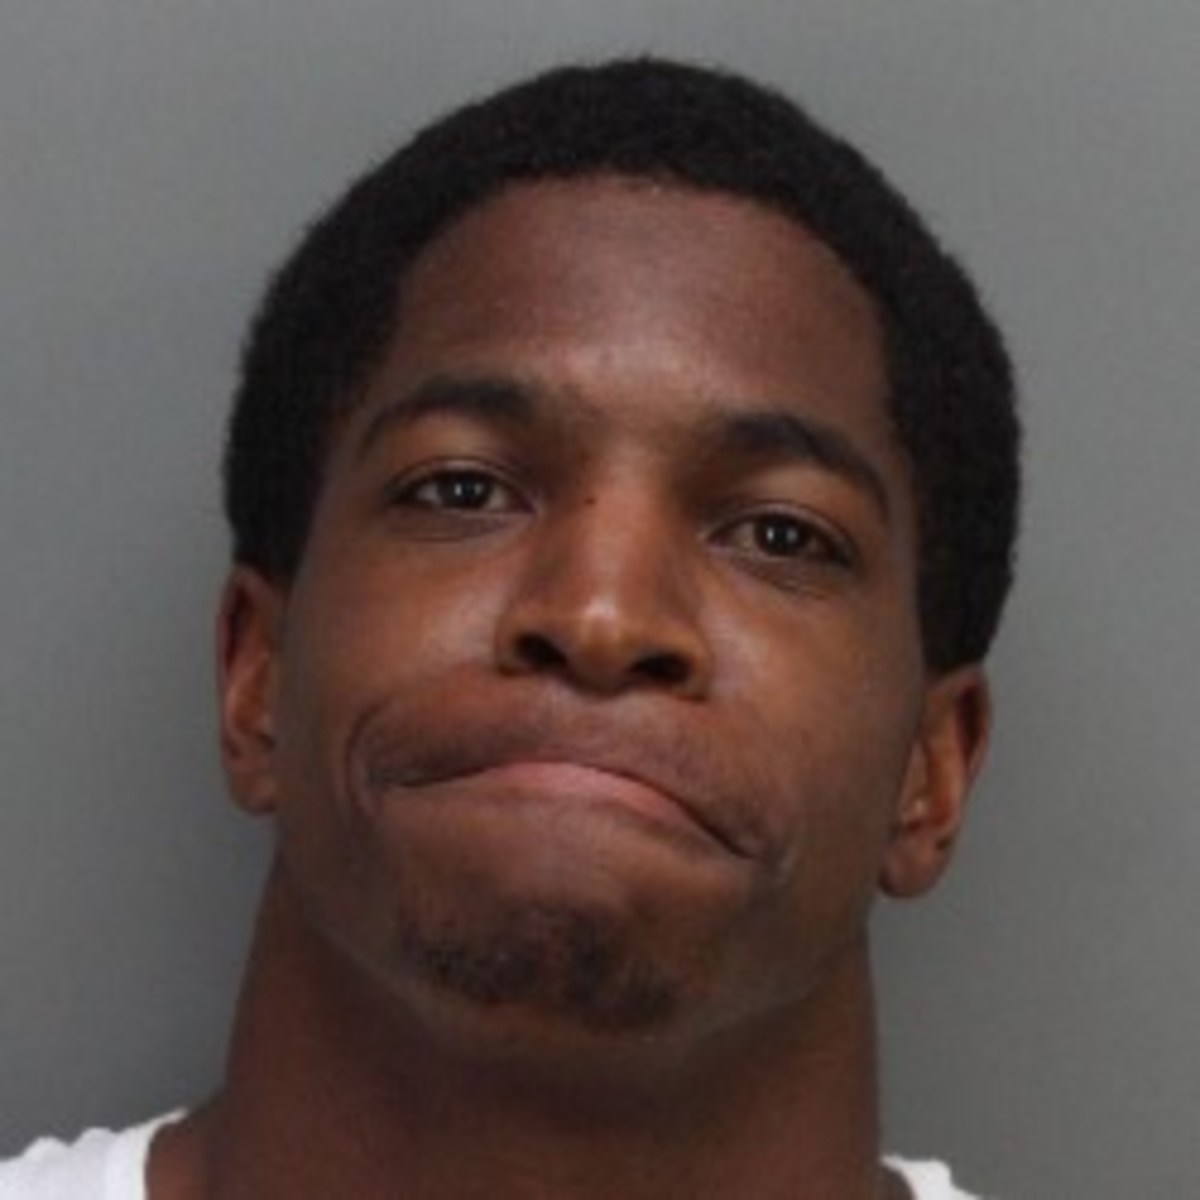 Former Lions wideout Titus Young was arrested twice in 15 hours this weekend. (Photo by Oakland Press)